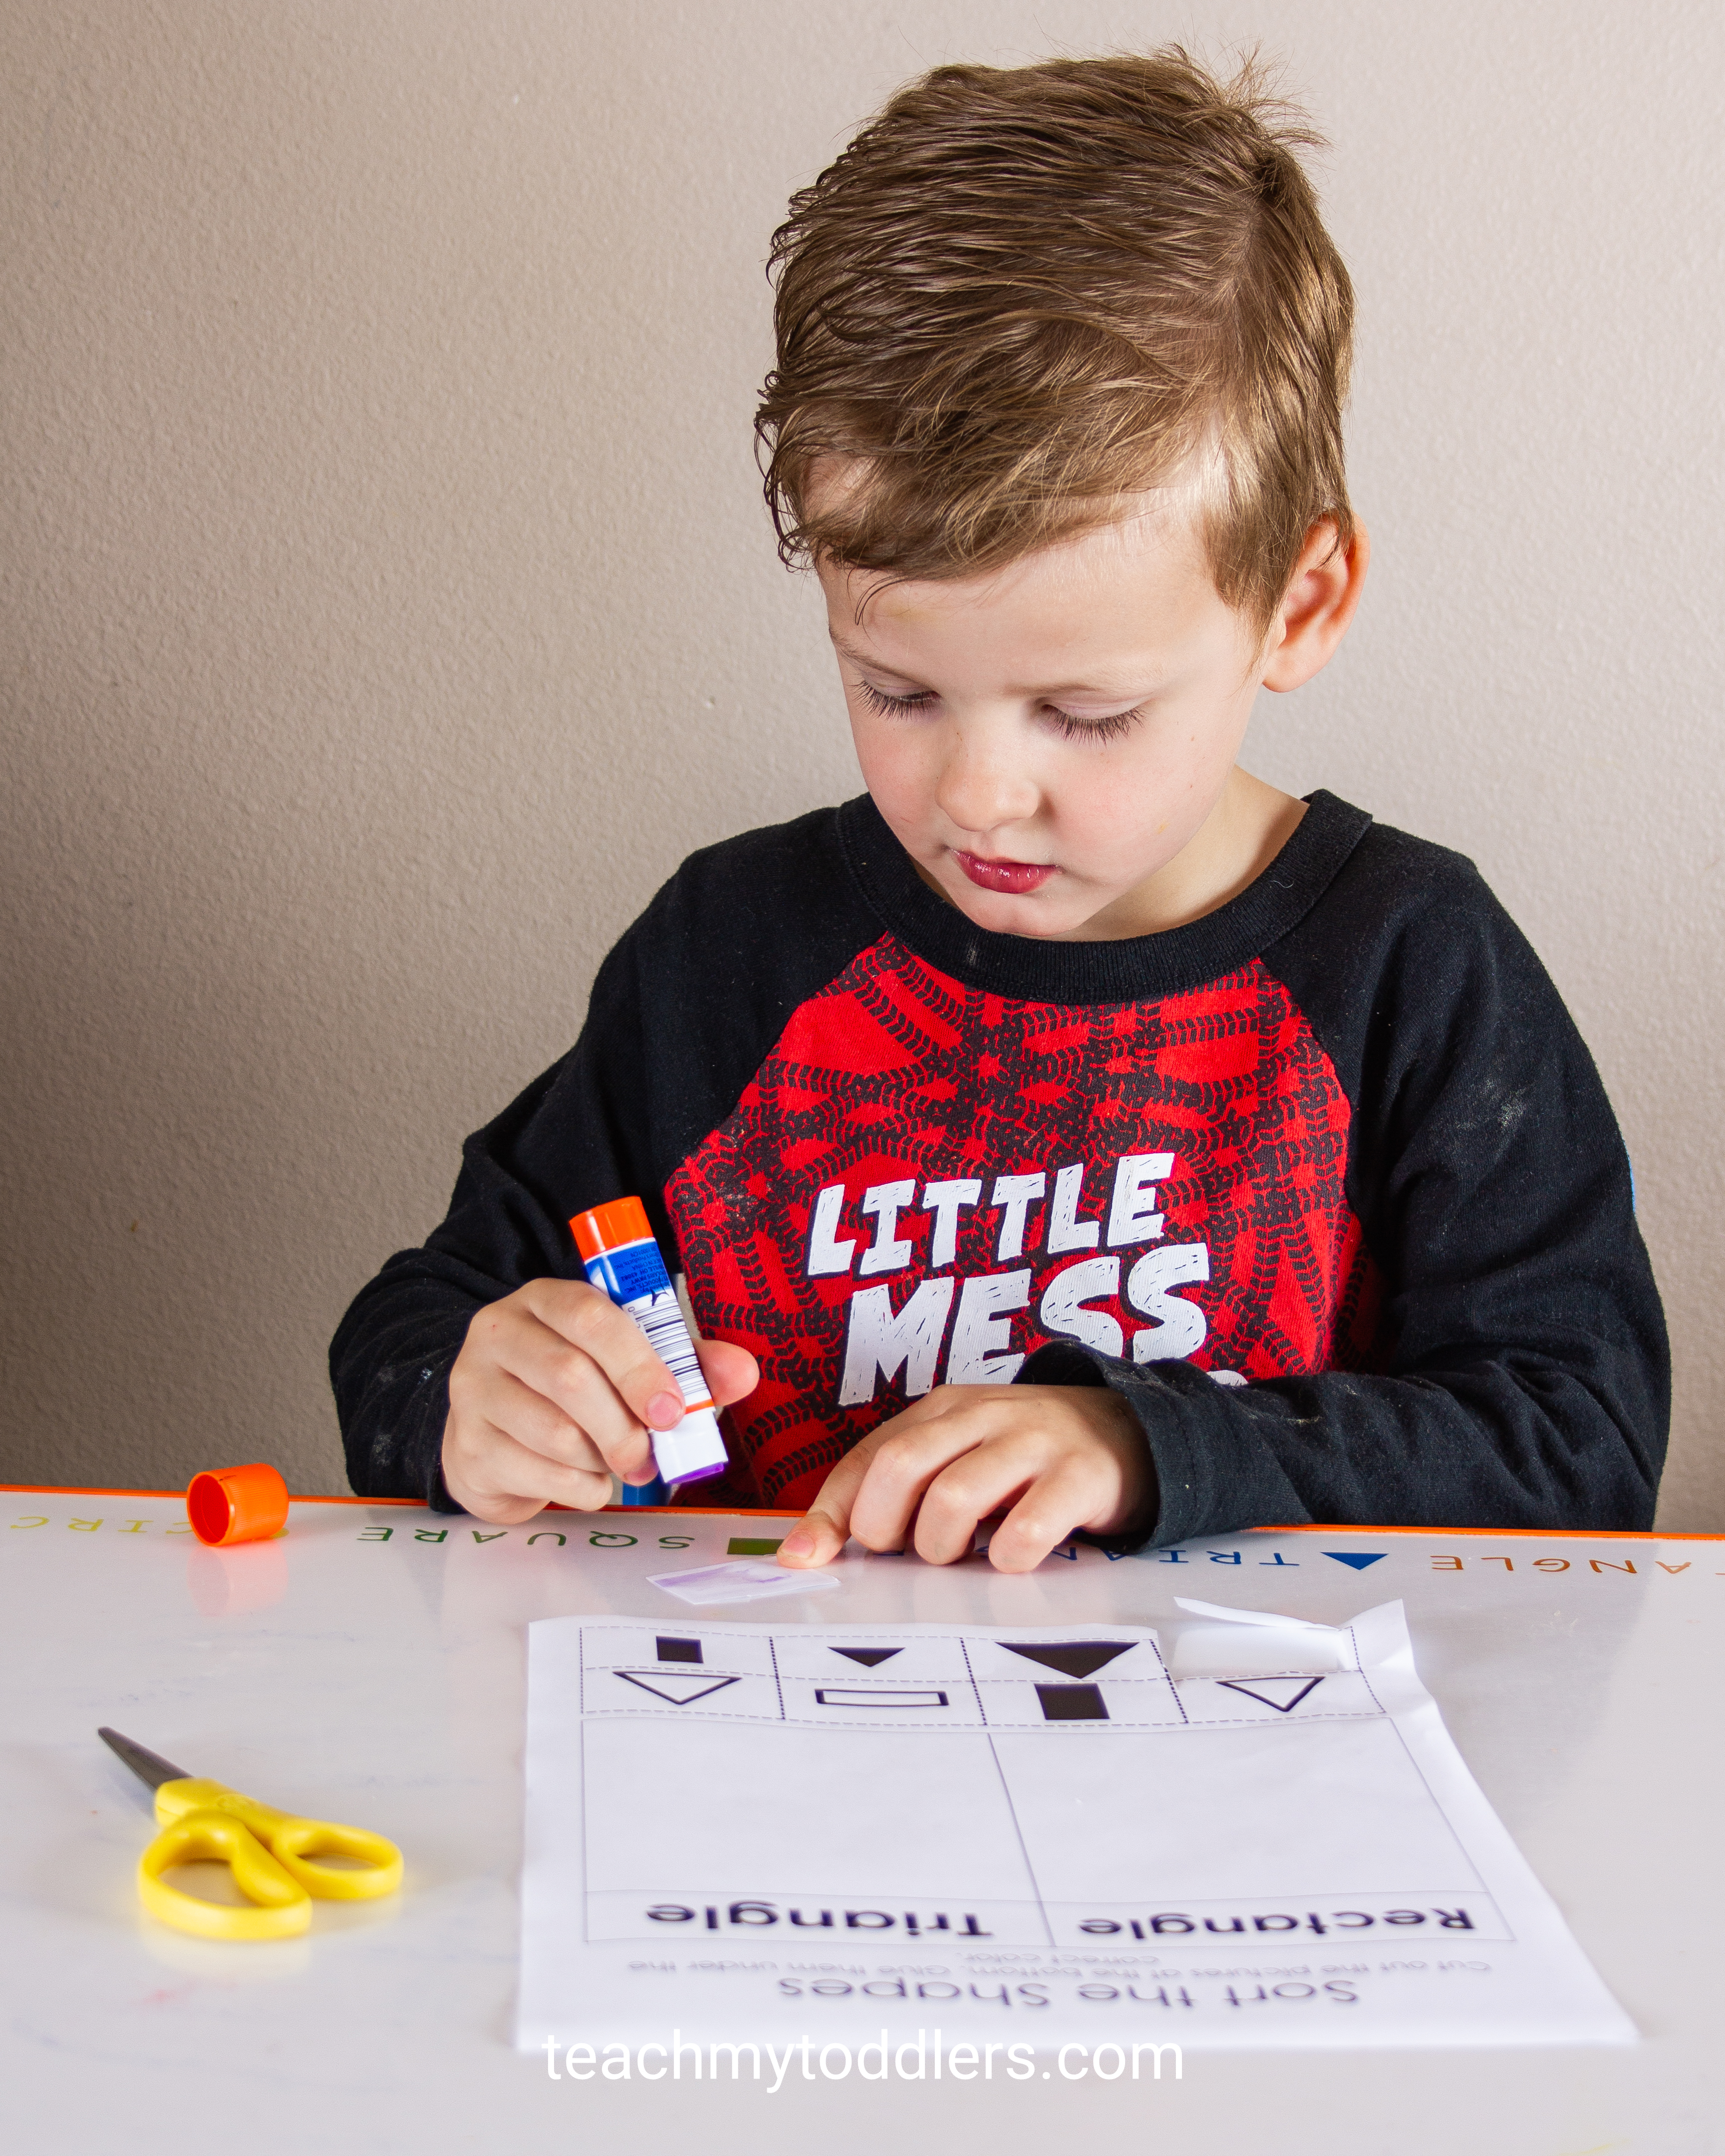 Learn how to use this shape sorting cut and paste activity to teach your preschoolers shapes